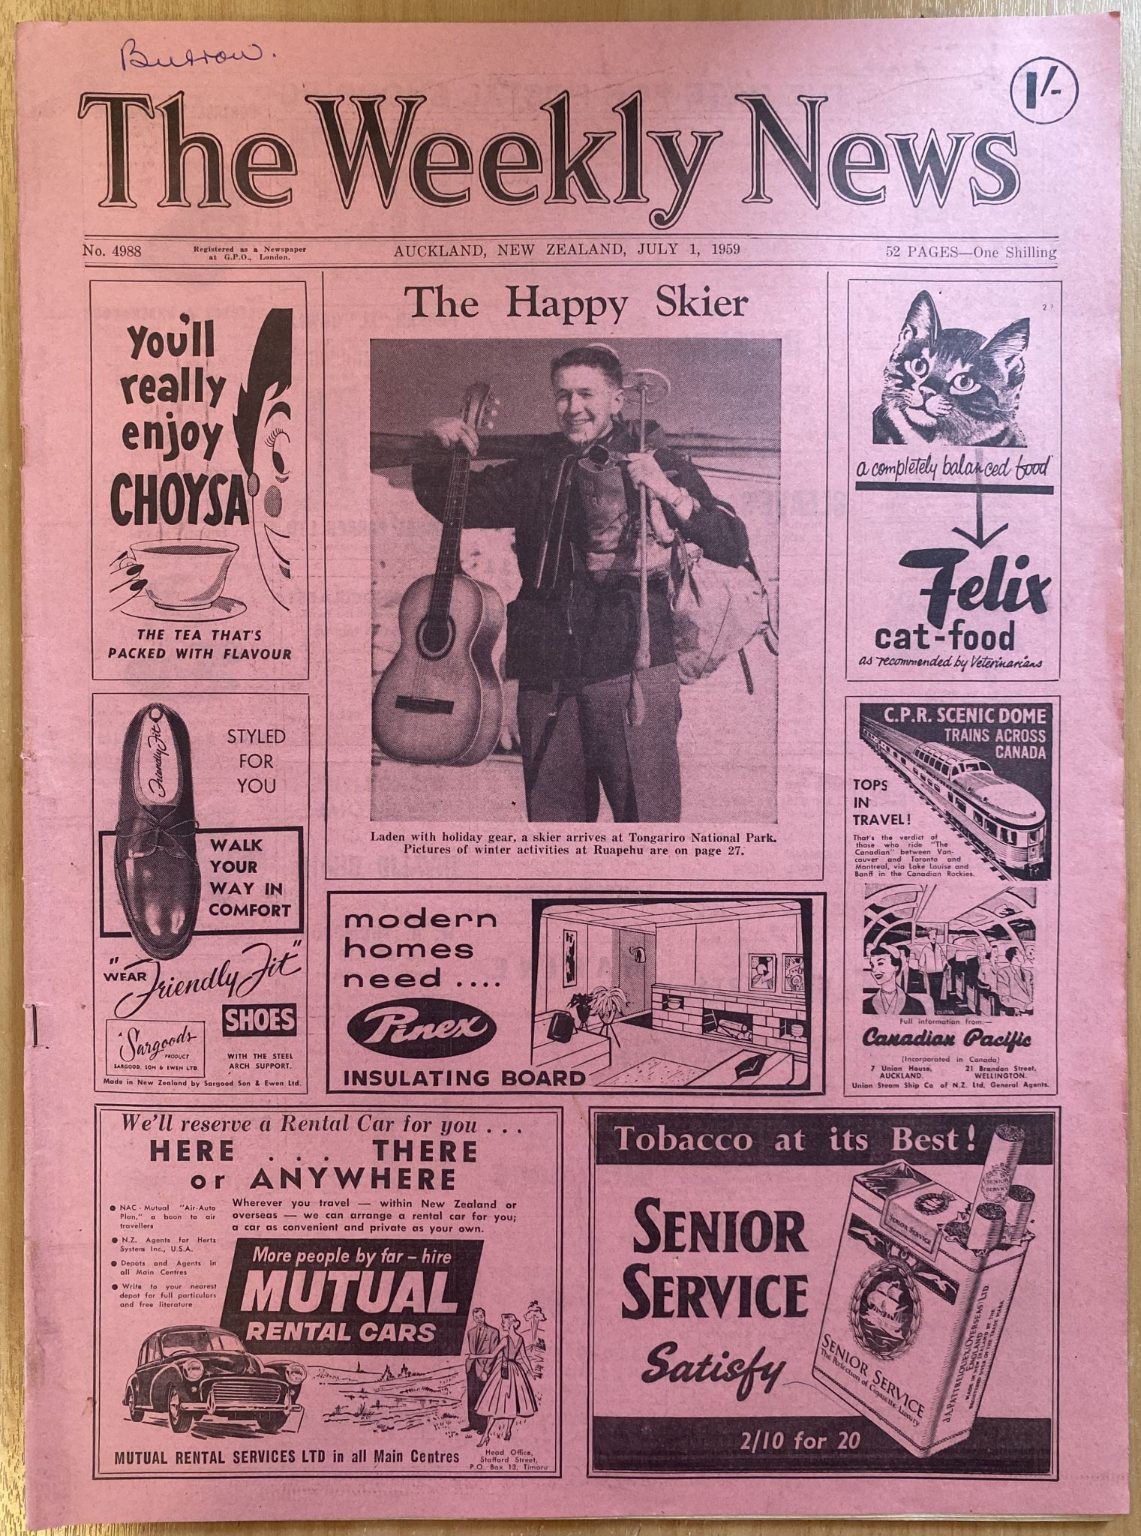 OLD NEWSPAPER: The Weekly News - No. 4988, 1 July 1959